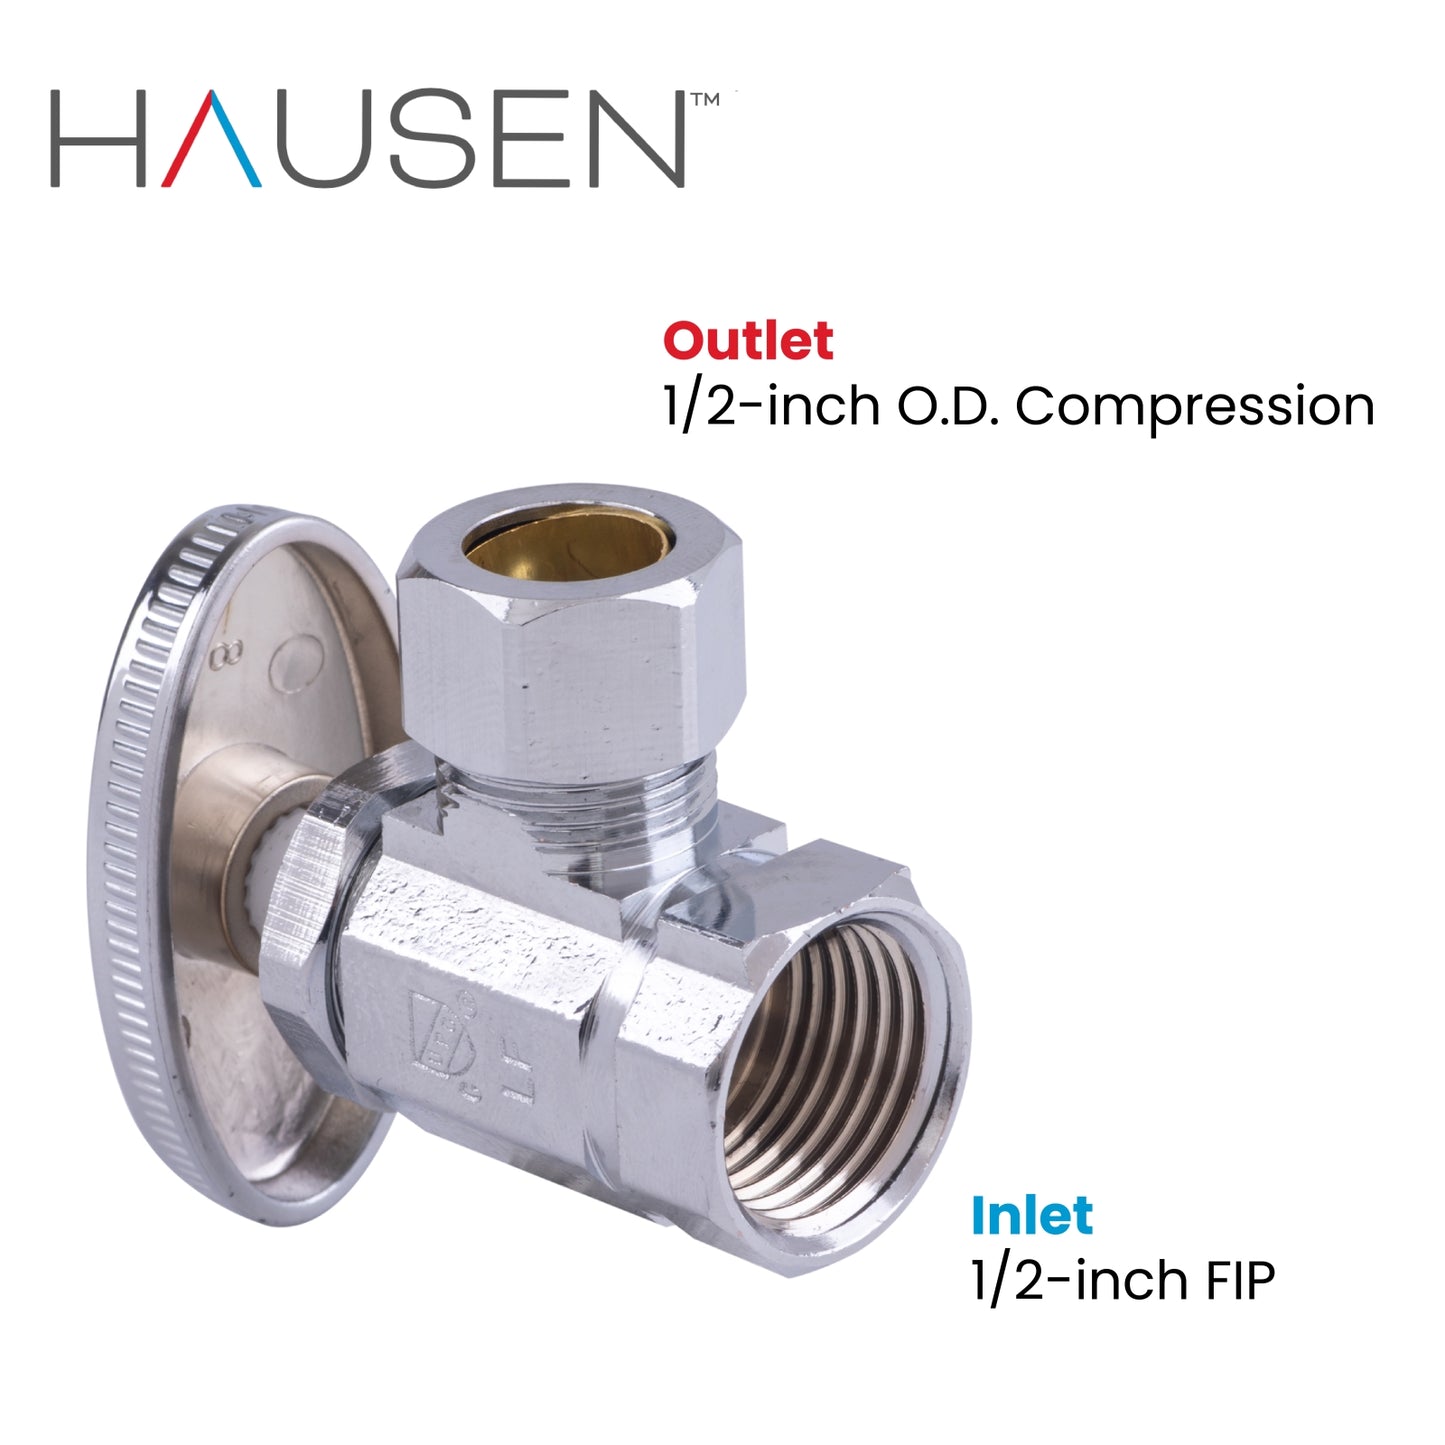 Hausen 1/2-inch FIP Inlet x 1/2-inch O.D. Compression Outlet Multi-Turn Angle Water Stop; Lead-Free Forged Brass; Chrome-Plated; cUPC/ANSI/NSF Certified; Compatible with Iron and Copper Piping, 5-Pack